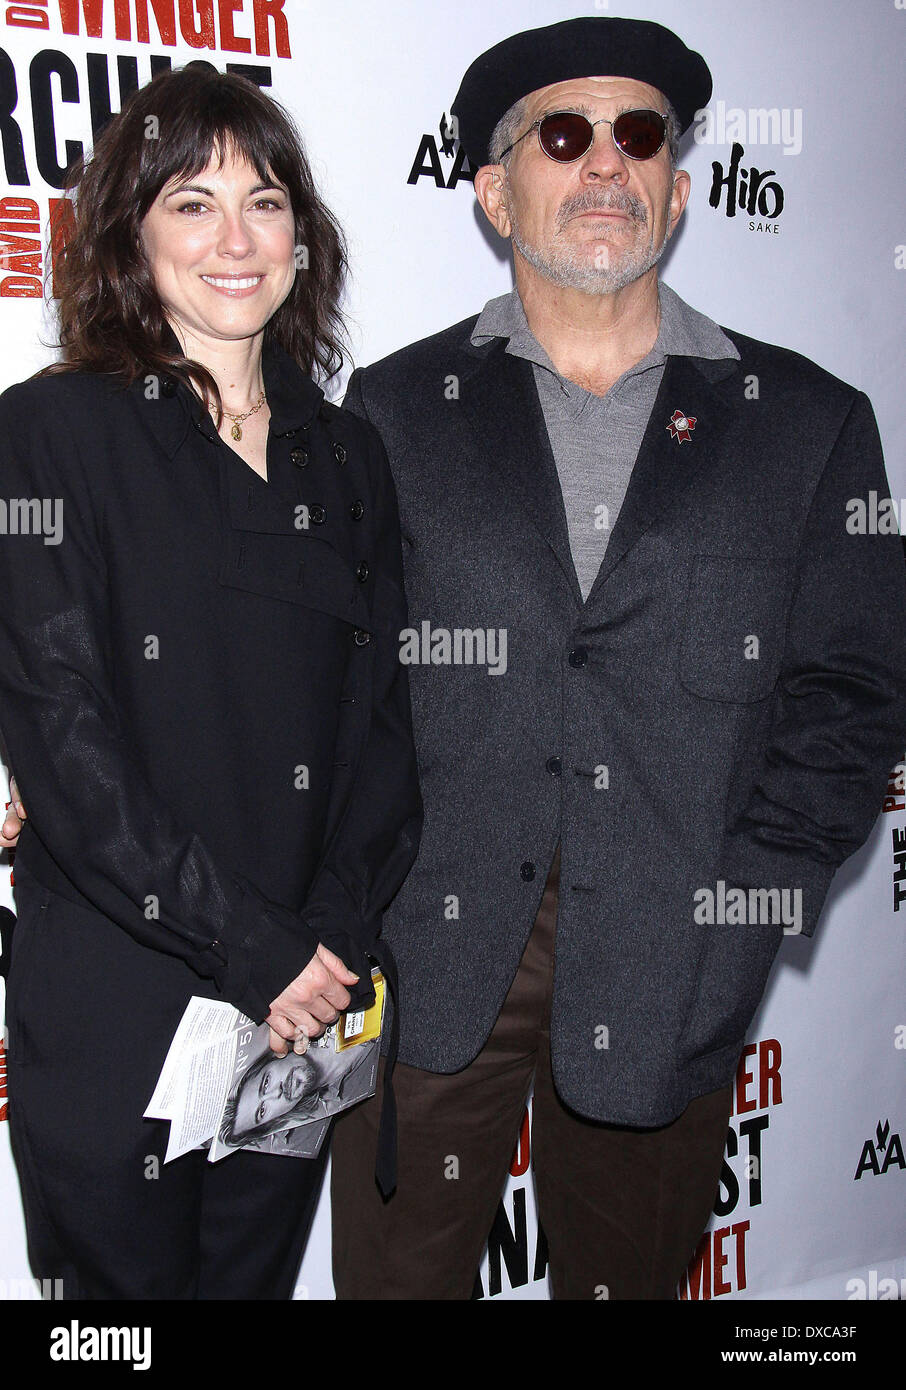 Rebecca Pidgeon and David Mamet at the Broadway opening night of 'The Anarchist' at the Golden Theatre - Arrivals. Featuring: R Stock Photo